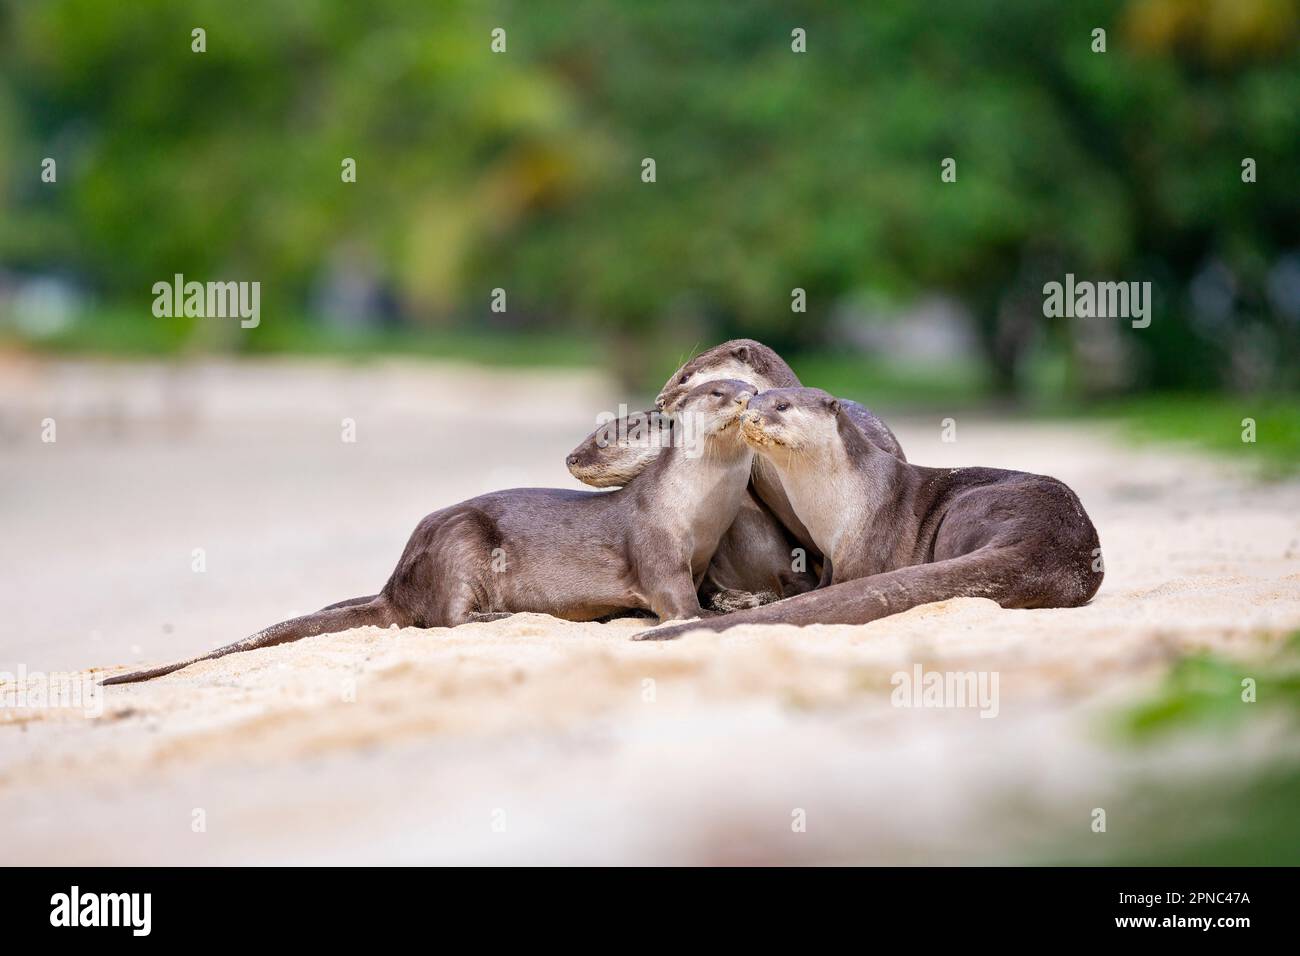 A smooth coated otter family reaffirm family bonds as they rest on a beach along the coast in Singapore Stock Photo